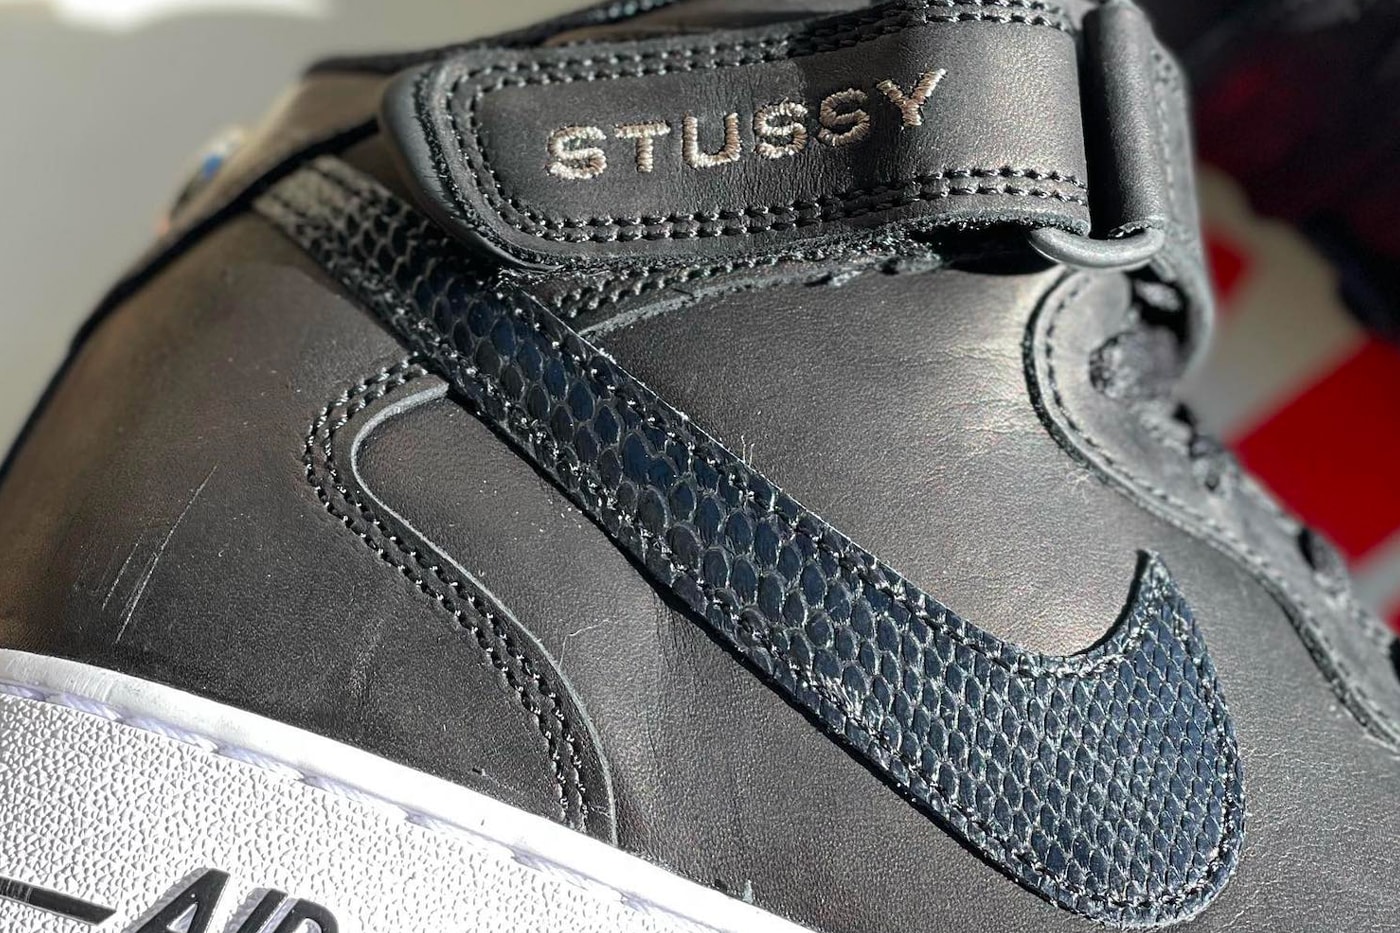 Stüssy Nike Air Force 1 '07 Mid SP Black Another Look Release Info DJ7840-002 Date Buy Price 40th Anniversary 